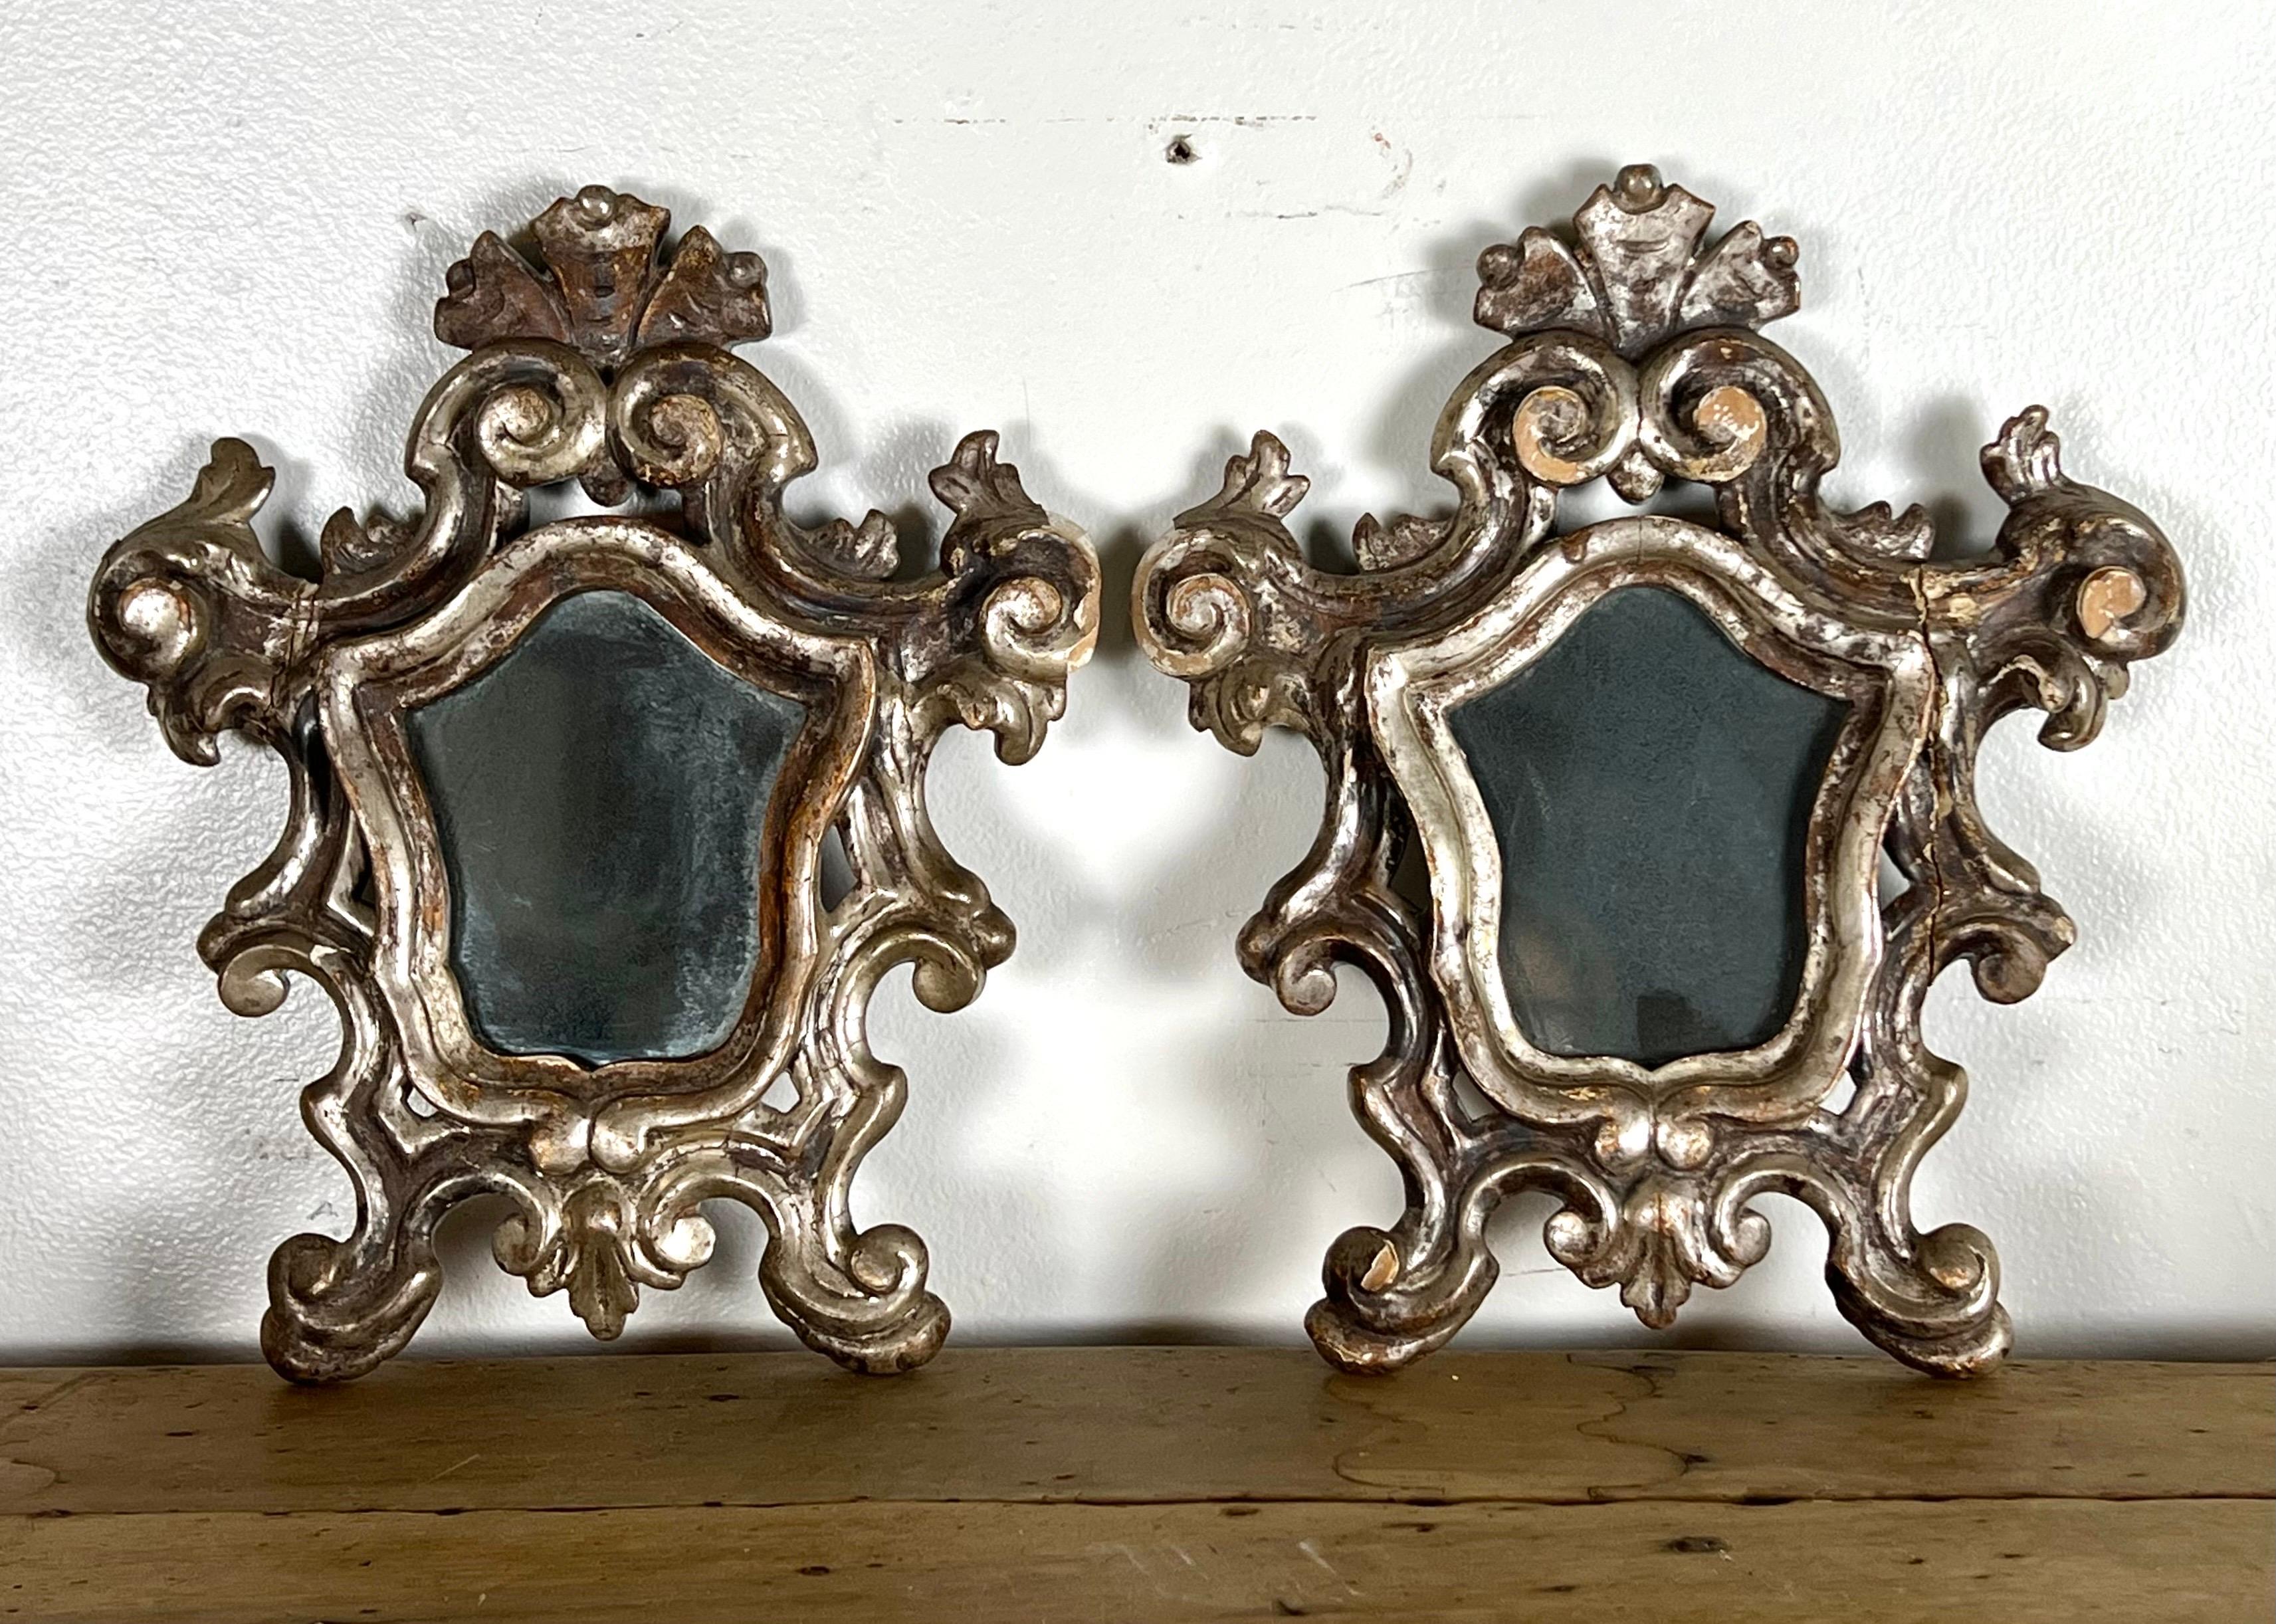 A pair of petite scroll shaped 19th-century Italian silver-leaf, Baroque-style mirrors.  The combination of the intricate Baroque-style design with the scroll shapes adds character and elegance to the mirrors.  They would make great decorative